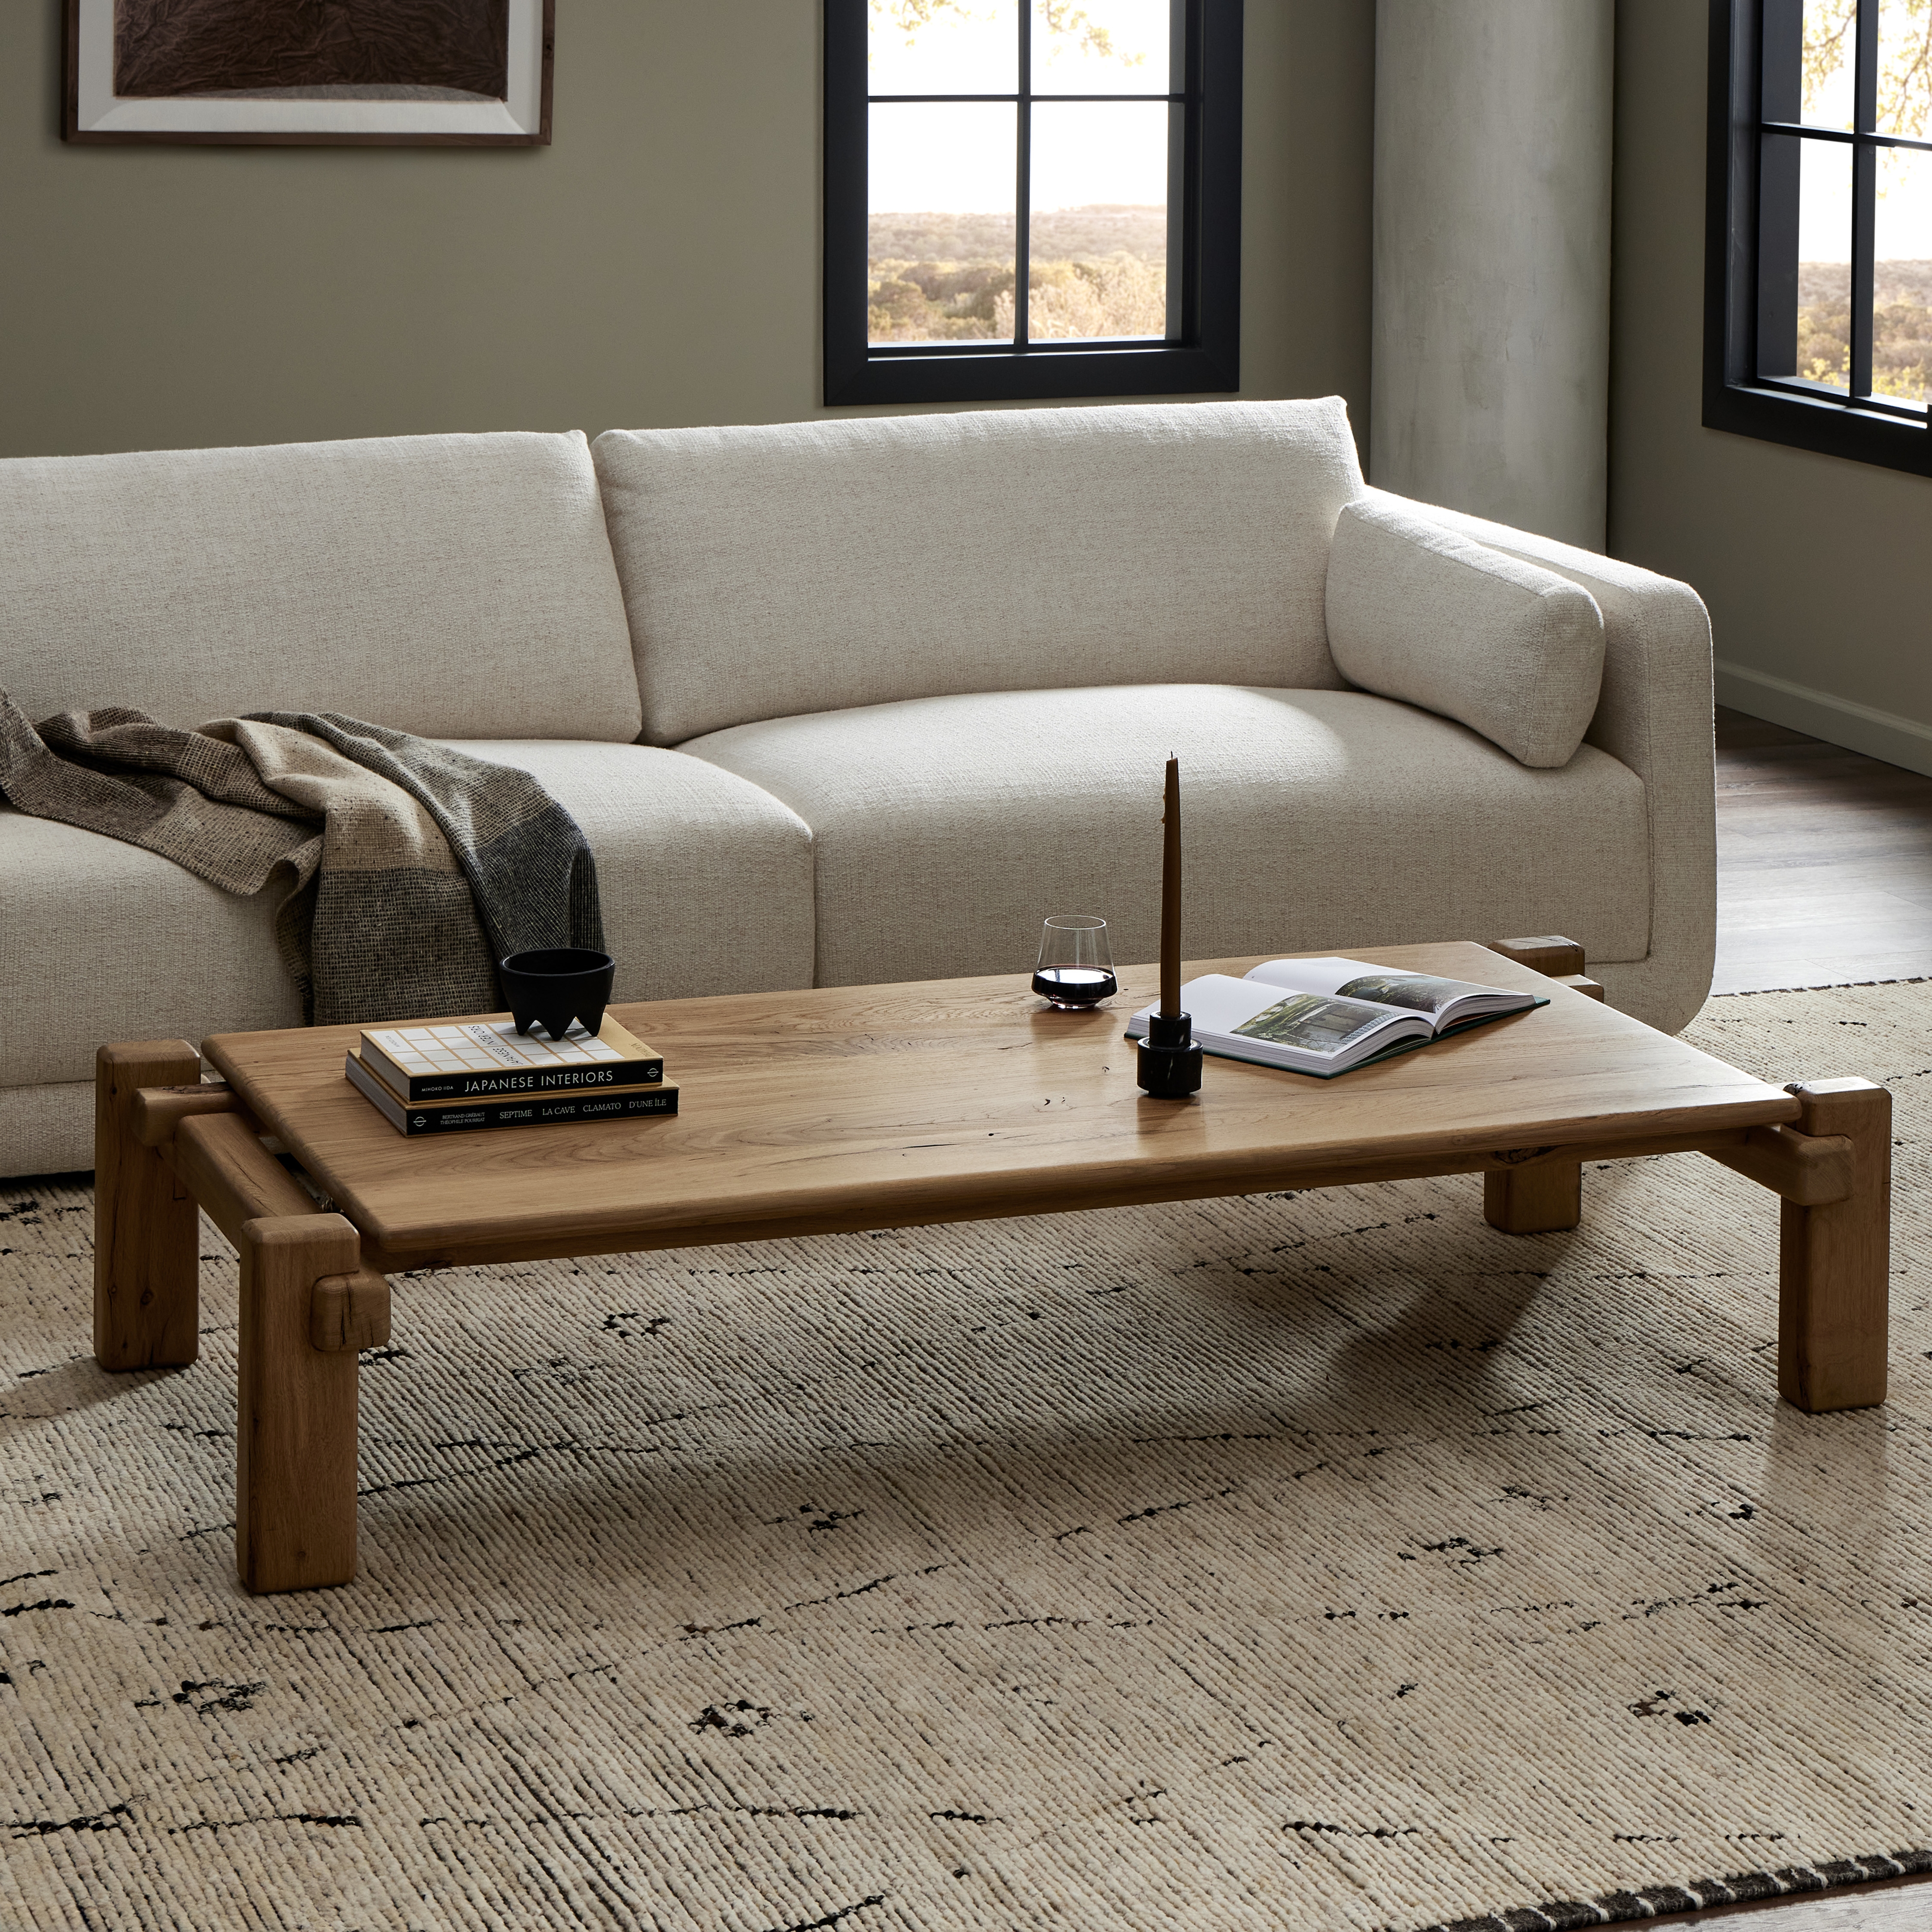 Marcia Large Coffee Table-French Oak - Image 11